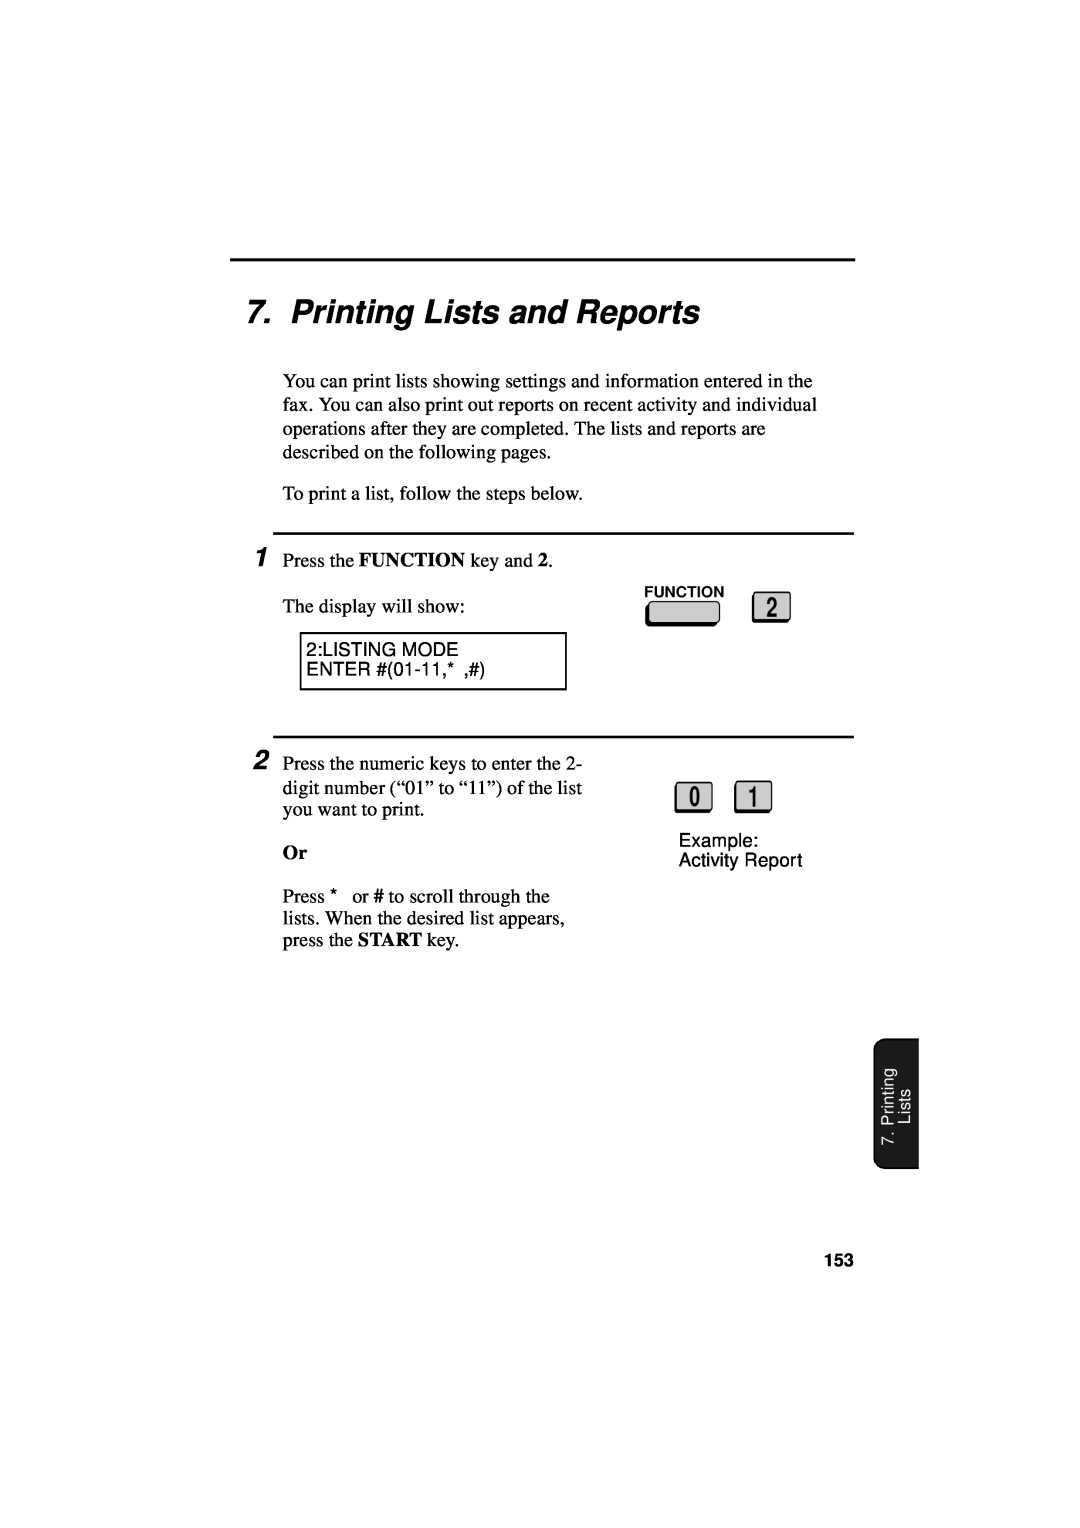 Sharp FO-5550, FO-5700, FO-4700 Printing Lists and Reports, 2LISTING MODE, ENTER #01-11, *,#, Example Activity Report 